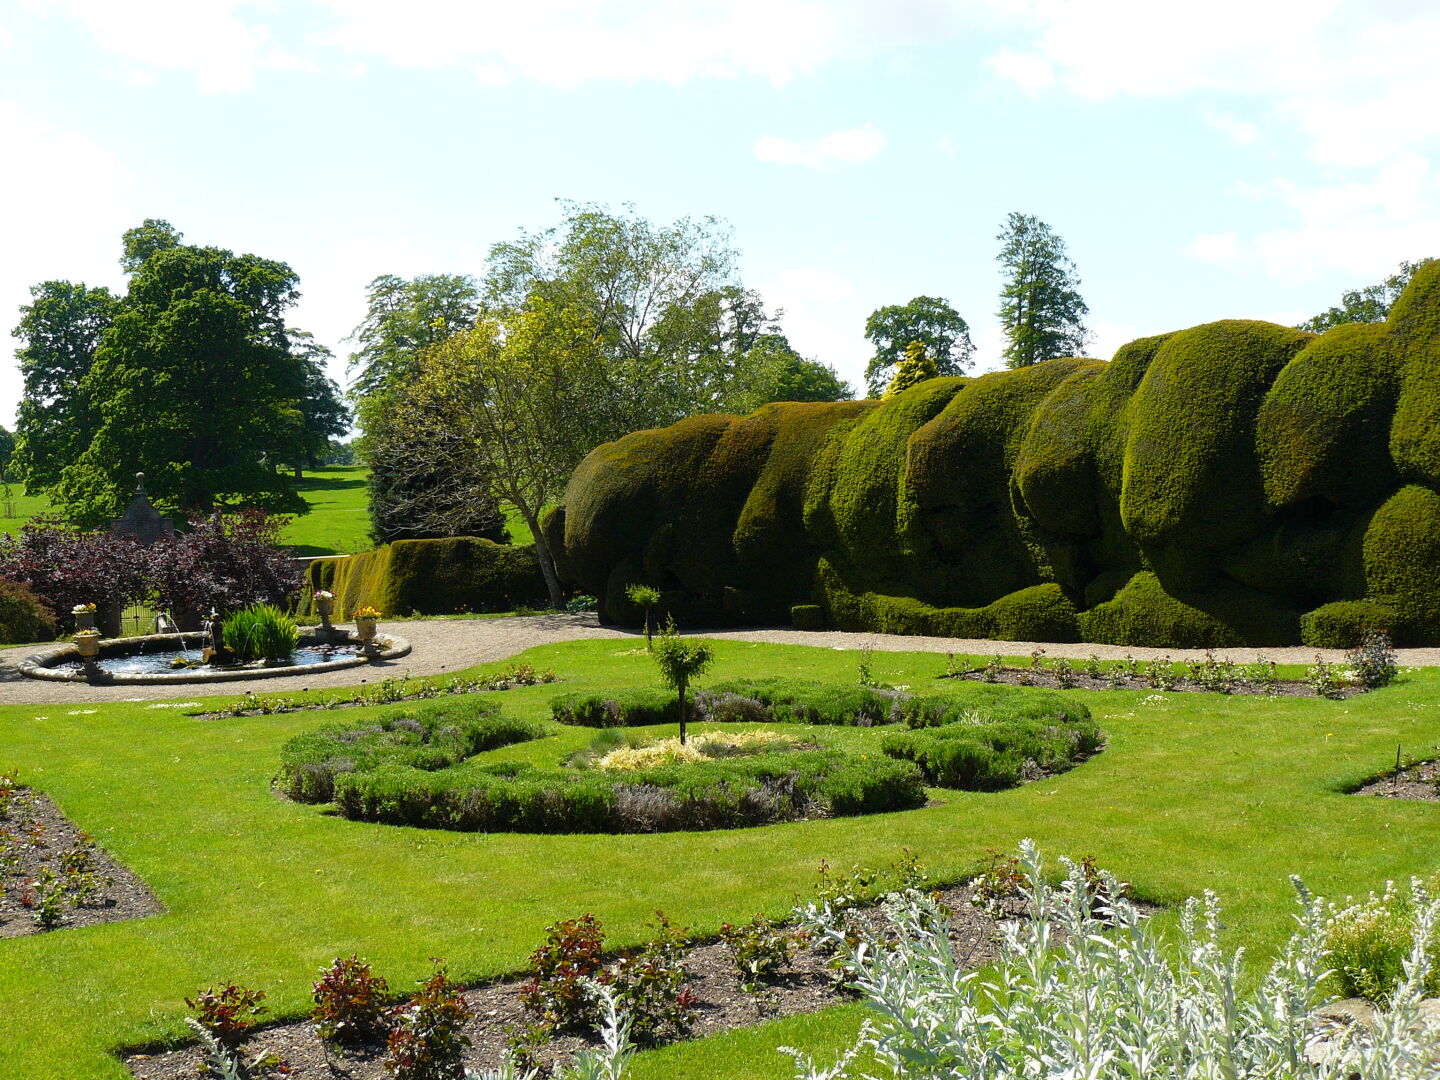 They feature two of these old yew hedges, which look really impressive.